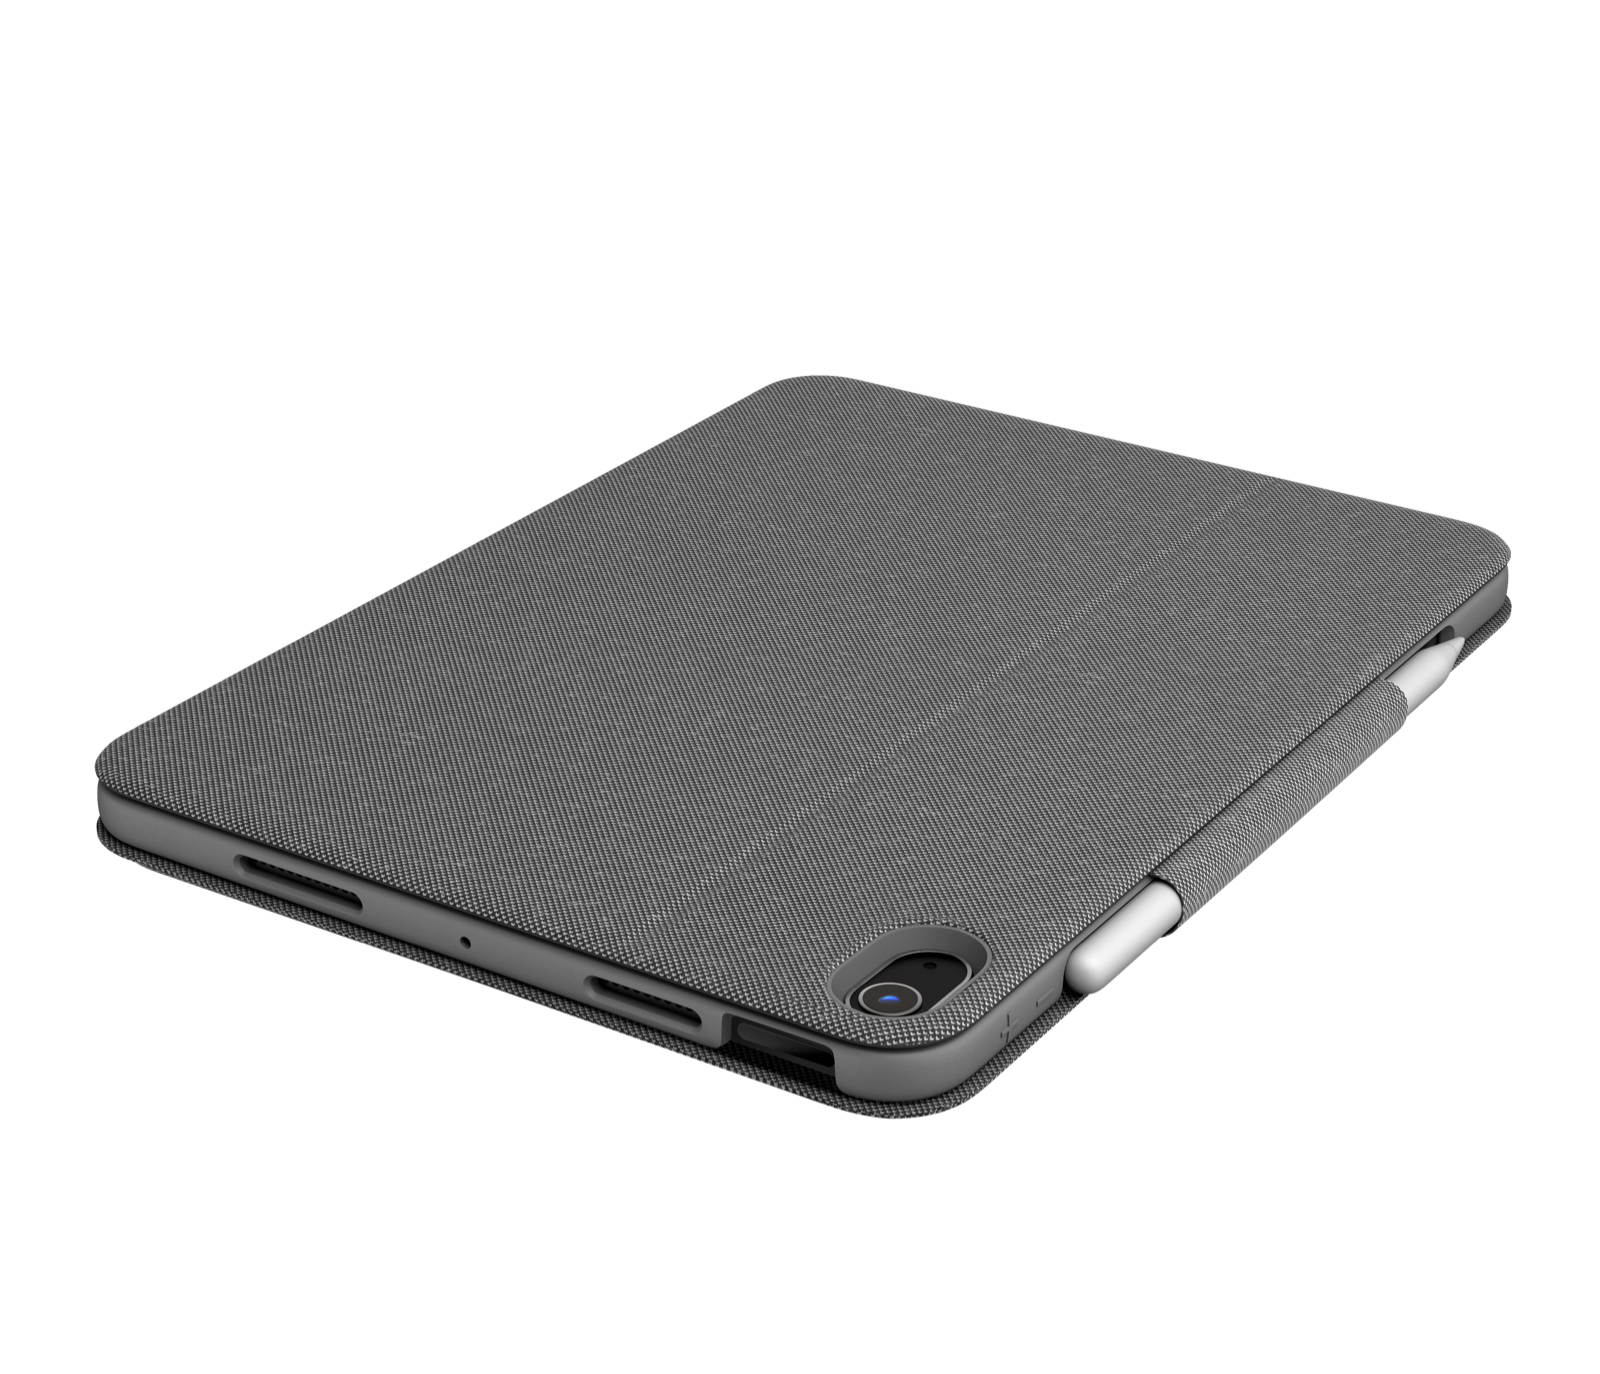 LOGITECH Folio Touch for iPad Air 4th generation OXFORD GREY INTNL (US)